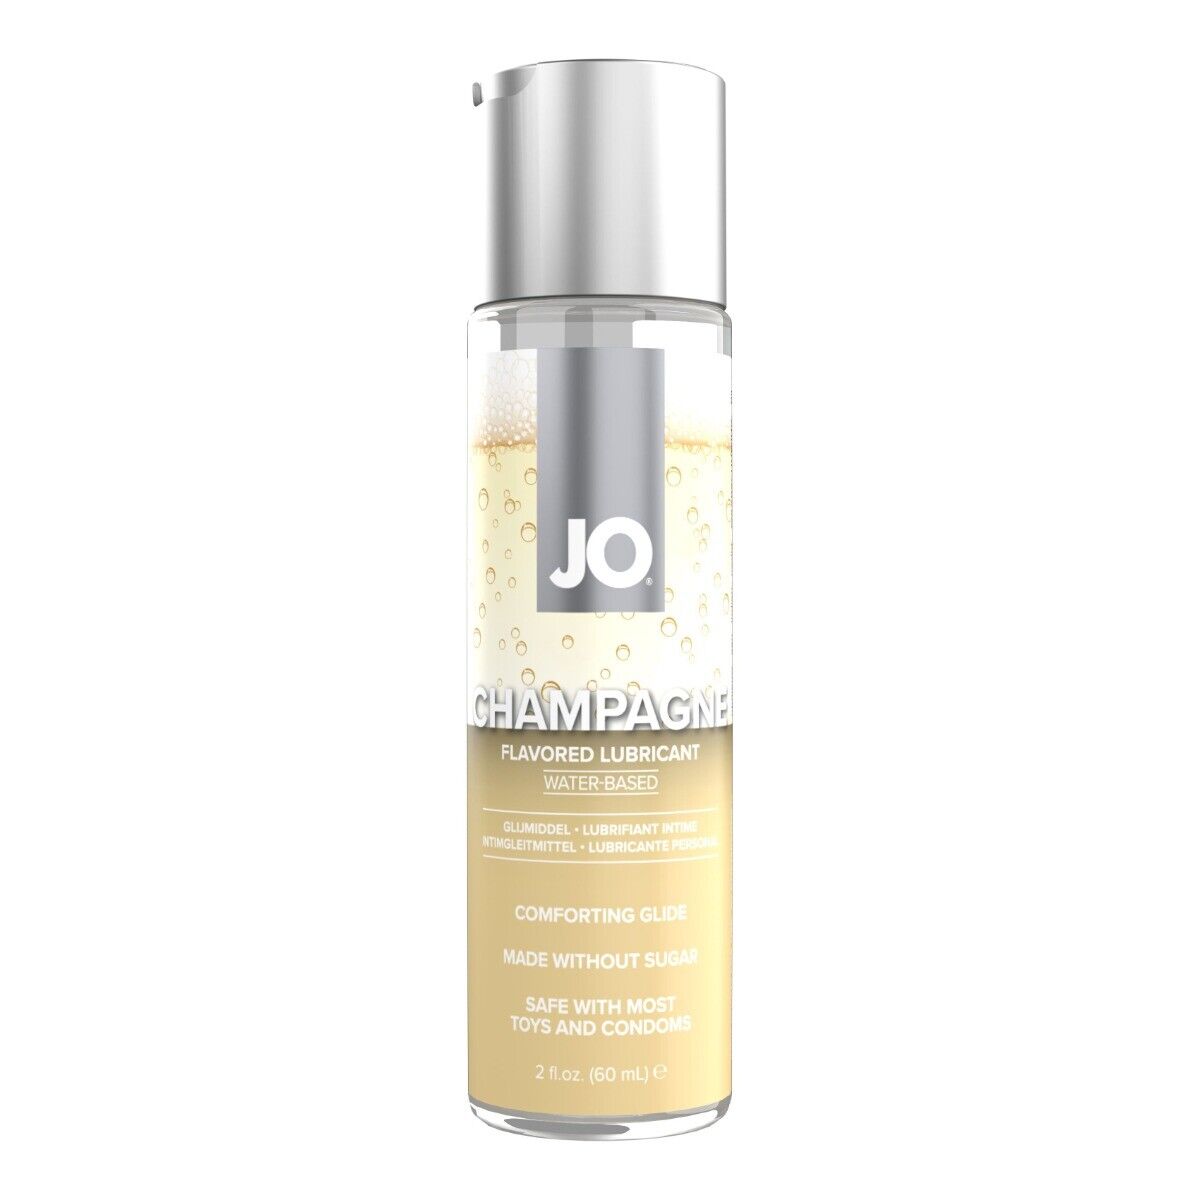 Jo Sweet & Bubbly Pleasure Set Champagne Strawberry Flavored Personal Lubricant